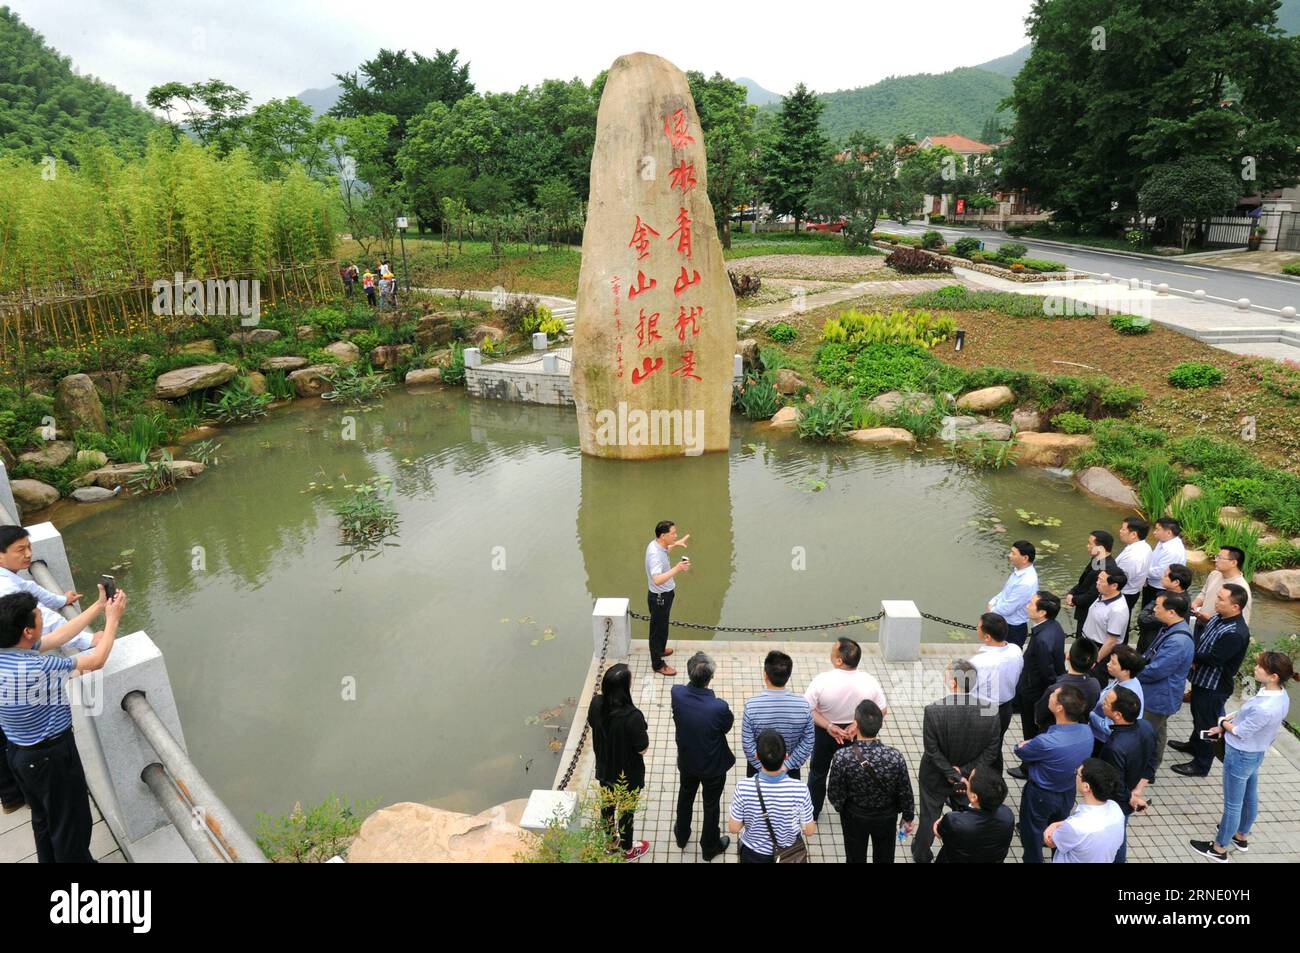 (160605) -- ANJI, June 5, 2016 -- Tourists visit the environment-friendly Yucun Village of Anji County, east China s Zhejiang Province, June 4, 2016. Anji is known for its pleasant environment with flourishing bamboo plantations and many scenes from the famous movie Crouching Tiger, Hidden Dragon were shot here. The county persists in green, low-carbon development, and strives to protect environment as well as to develop local economy. June 5 is observed as World Environment Day every year, and this year s theme issued by China s Ministry of Environment Protection is improving the quality of t Stock Photo